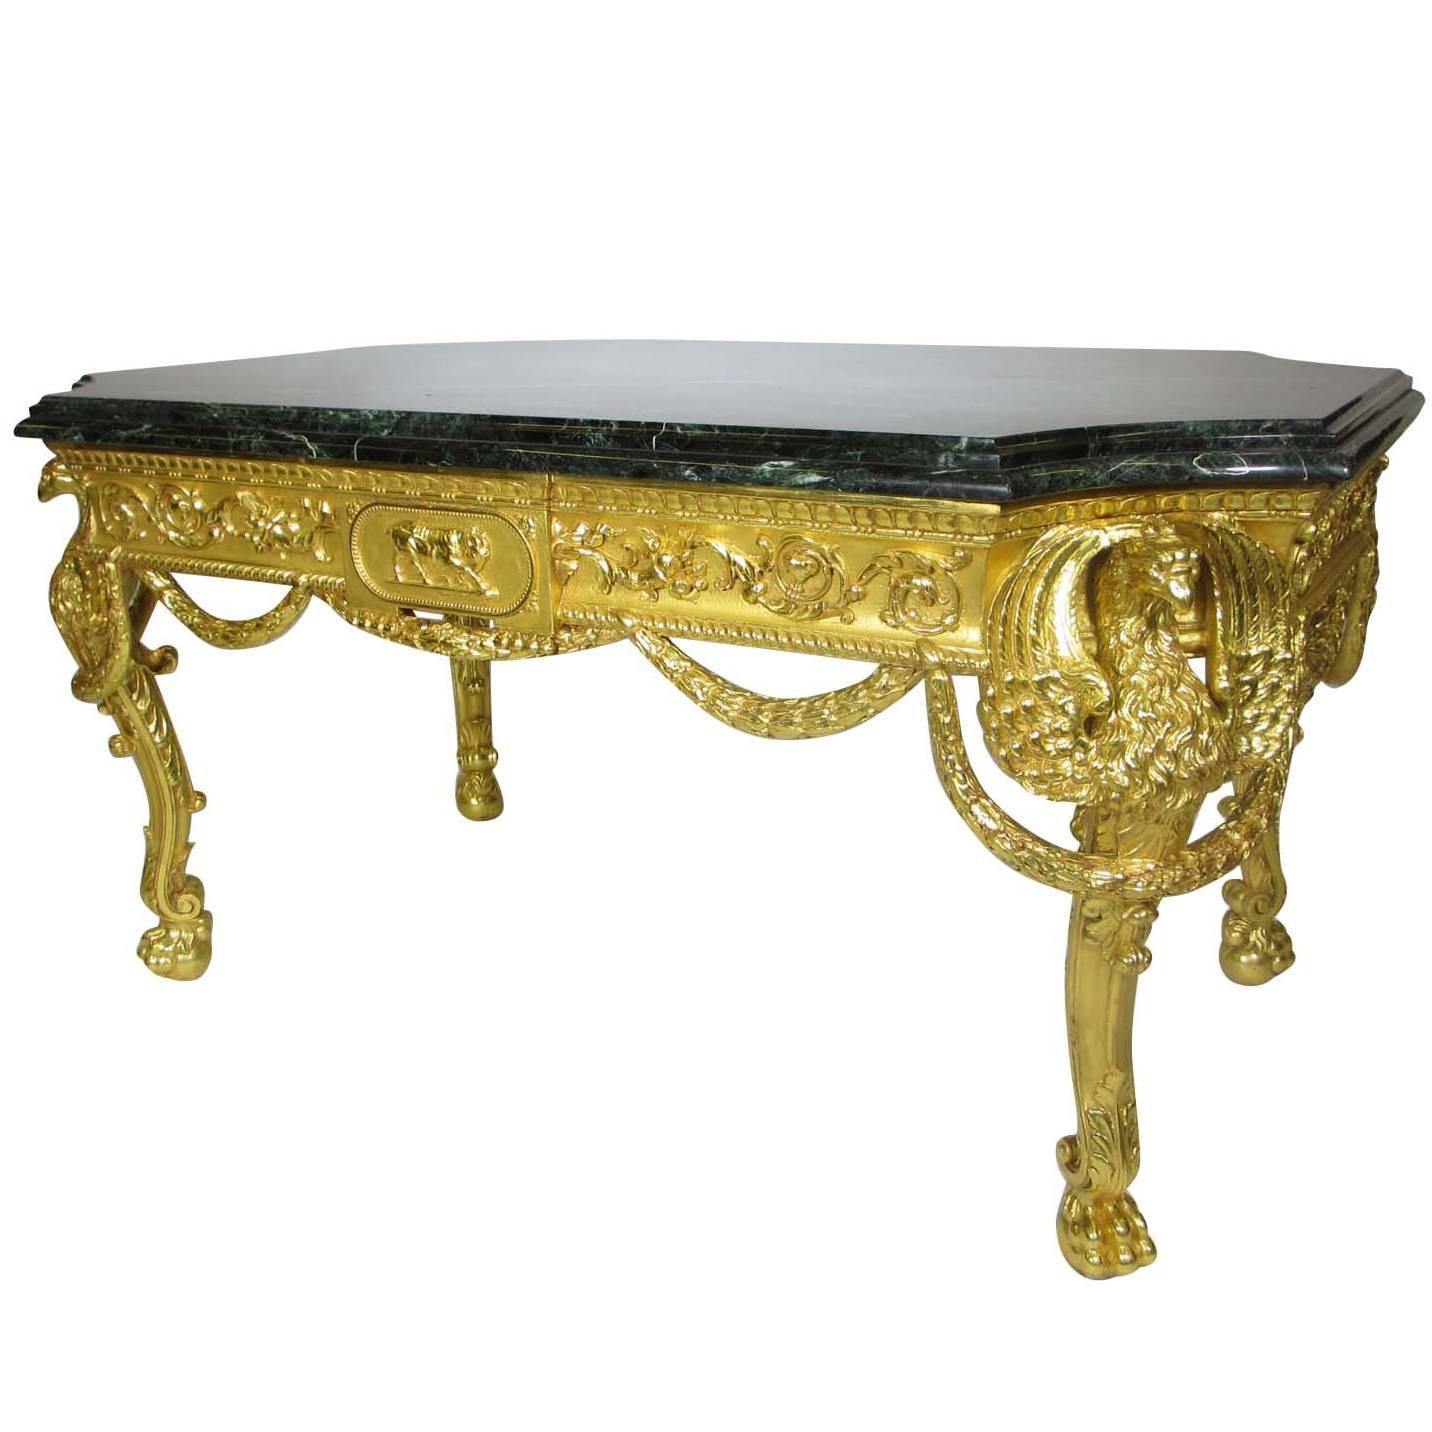 Palatial French 19th Century Empire Style Giltwood Carved Eagles Center Table